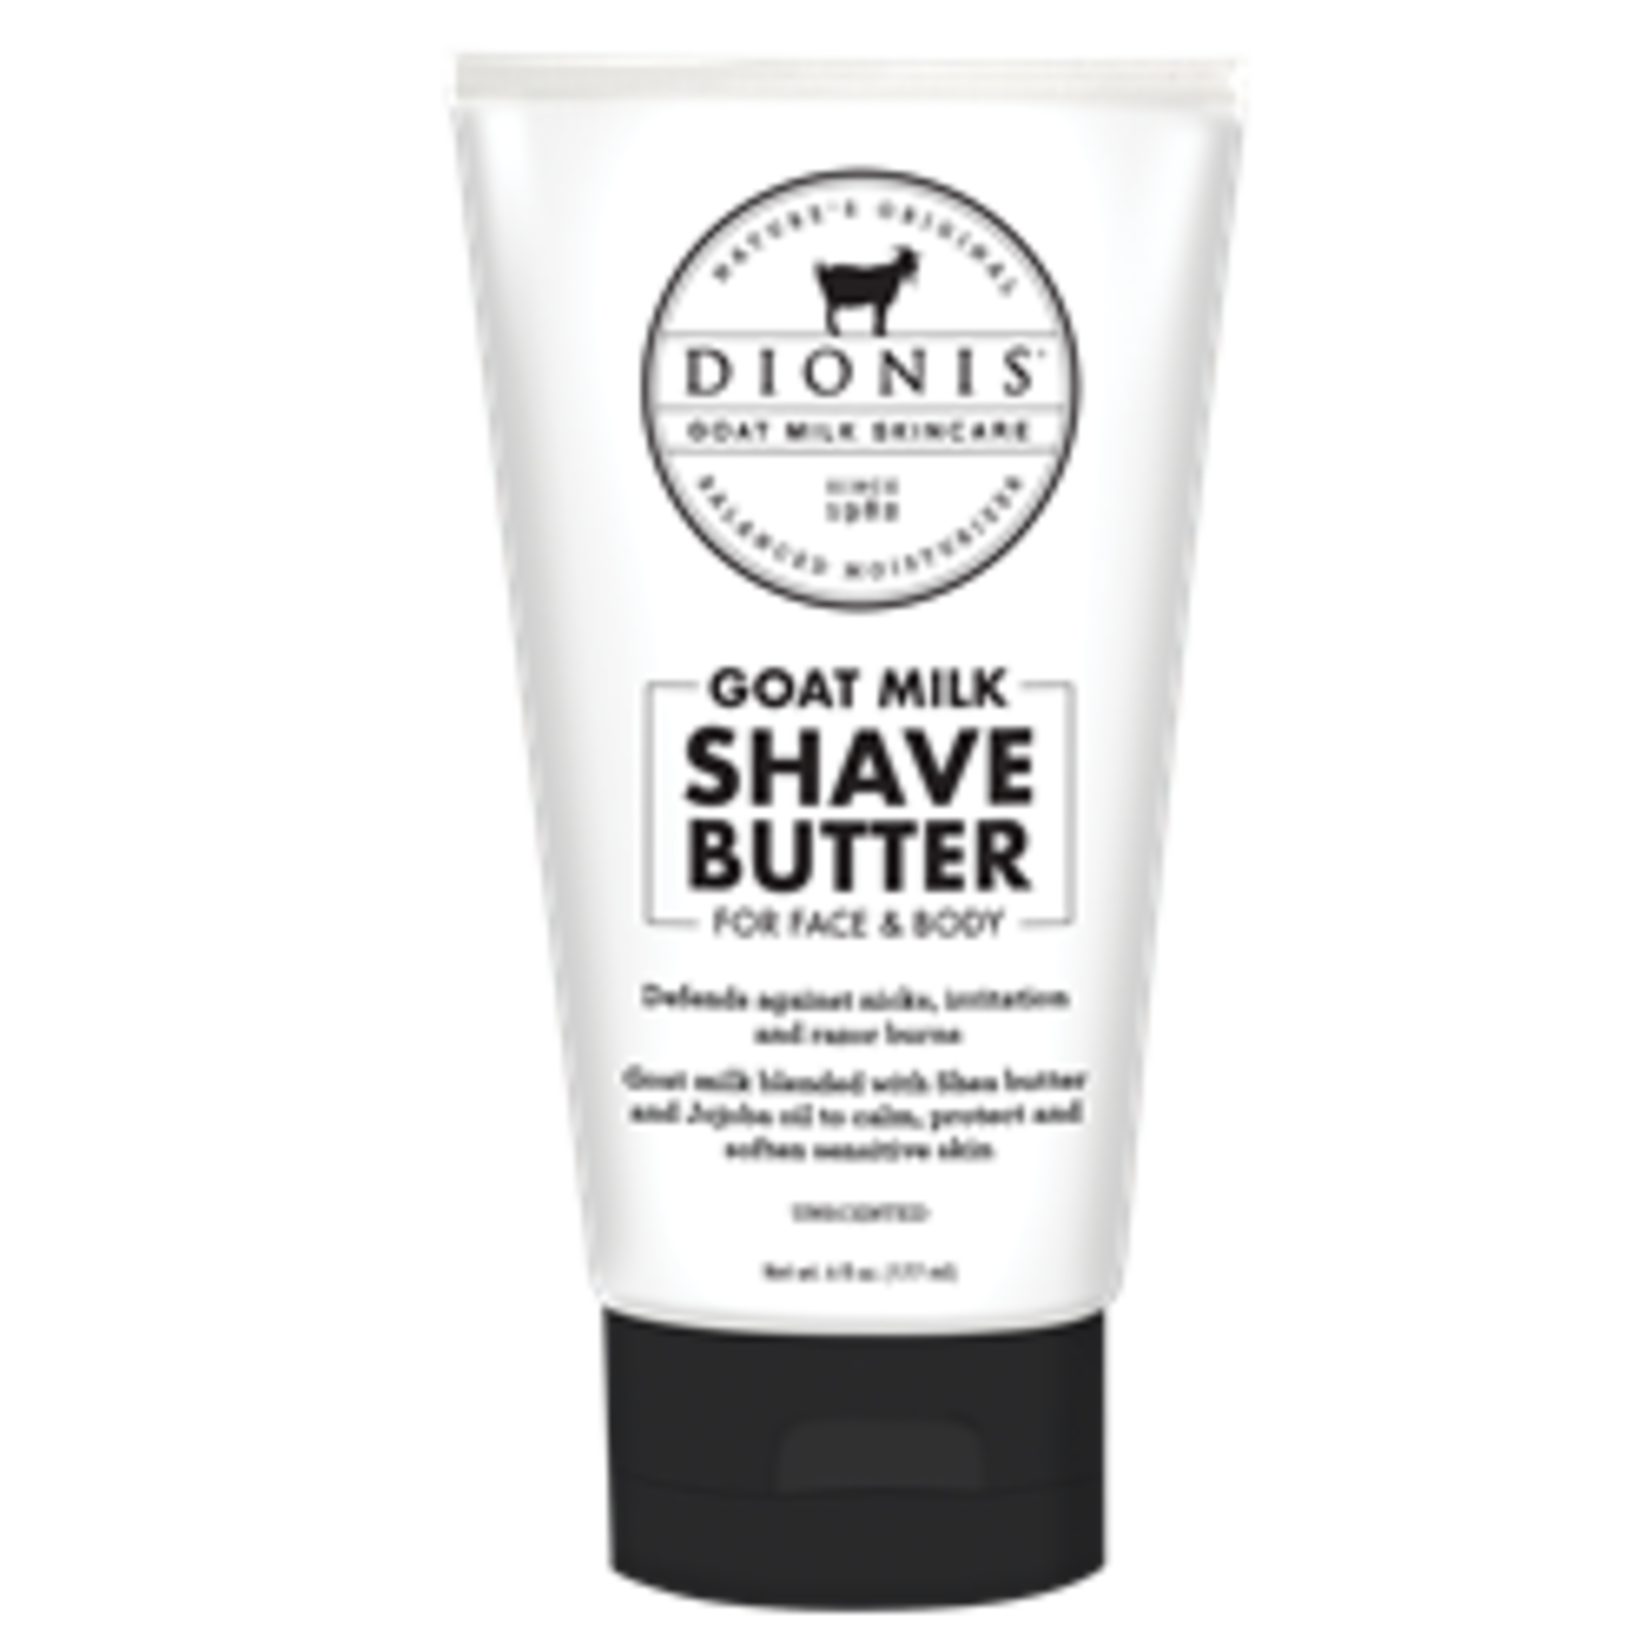 Dionis Dionis’ Goat Milk Shave Butter